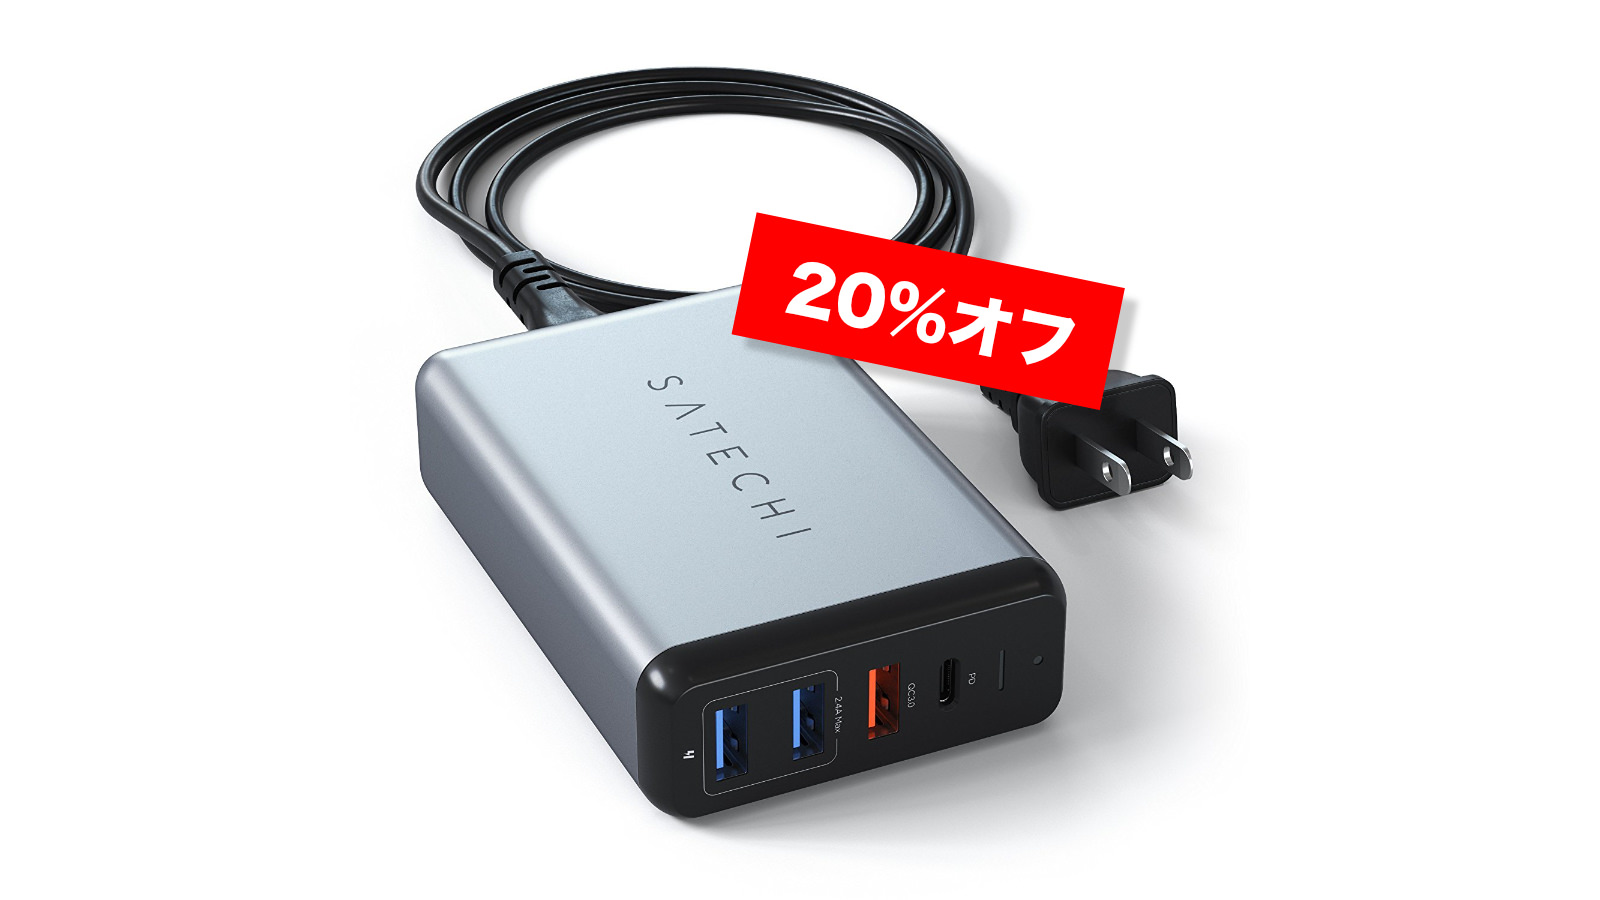 Satechi-Travel-Charger-Coupon-Sale.jpg